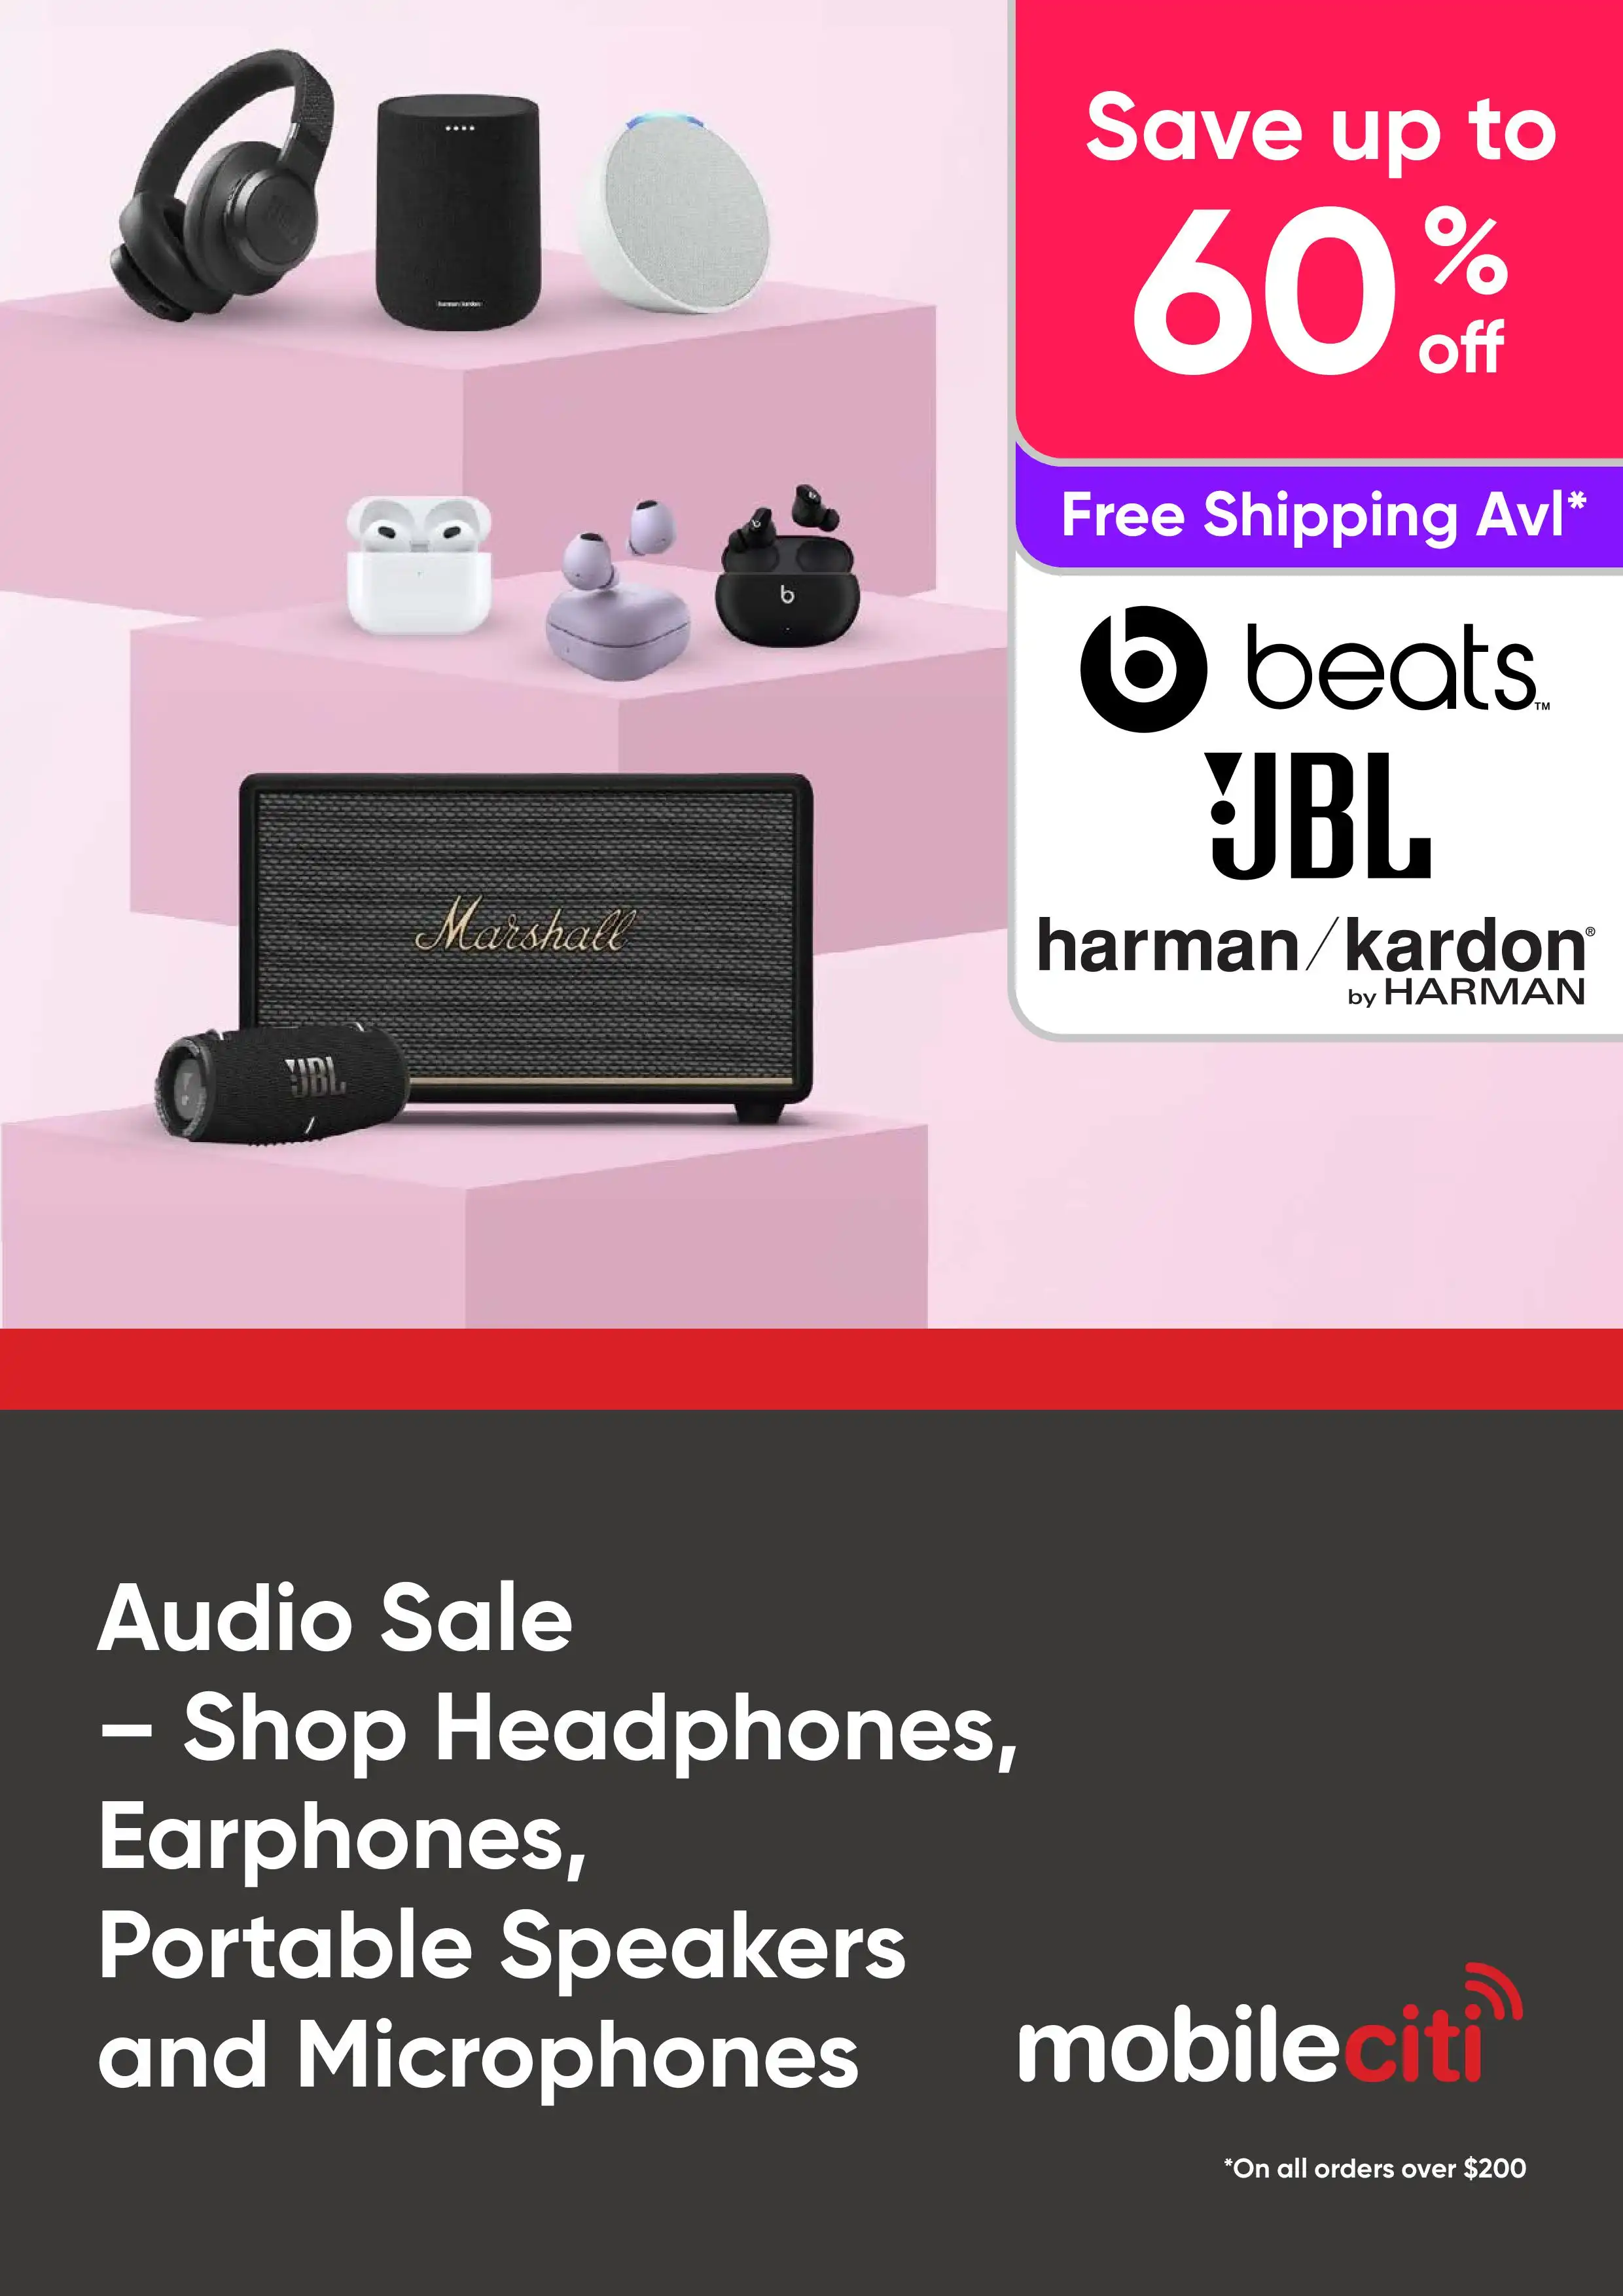 Audio Sale - Save Up to 60% Off on a Range of Headphones, Earphones, Portable Speakers and Microphones